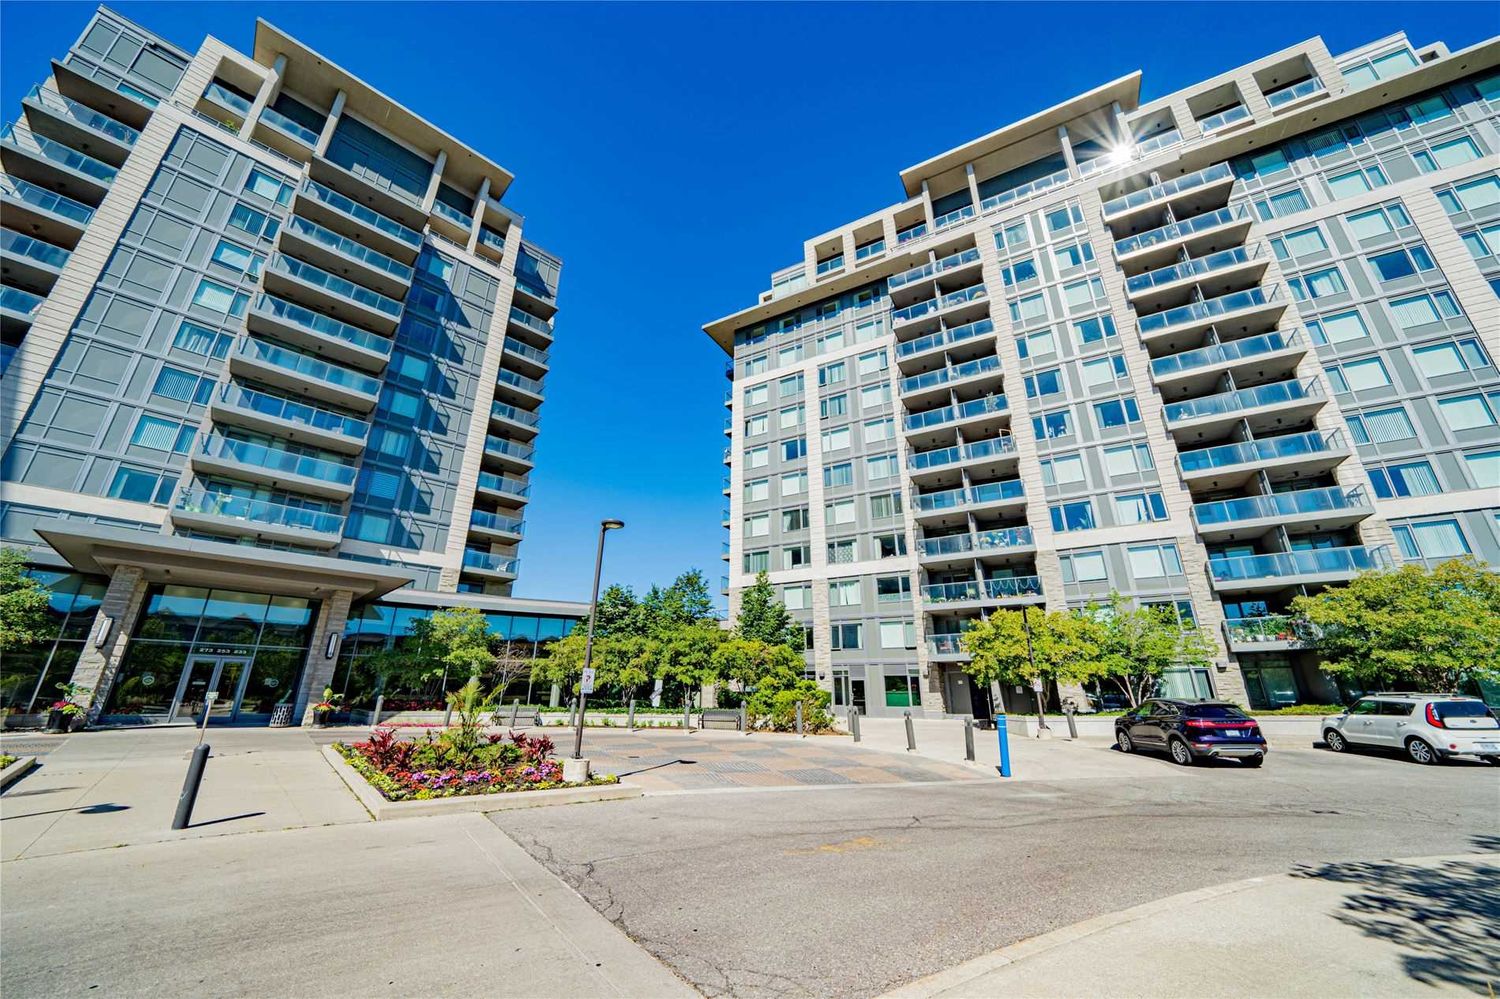 215-273 South Park Road. Eden Park Towers Condos is located in  Markham, Toronto - image #1 of 3